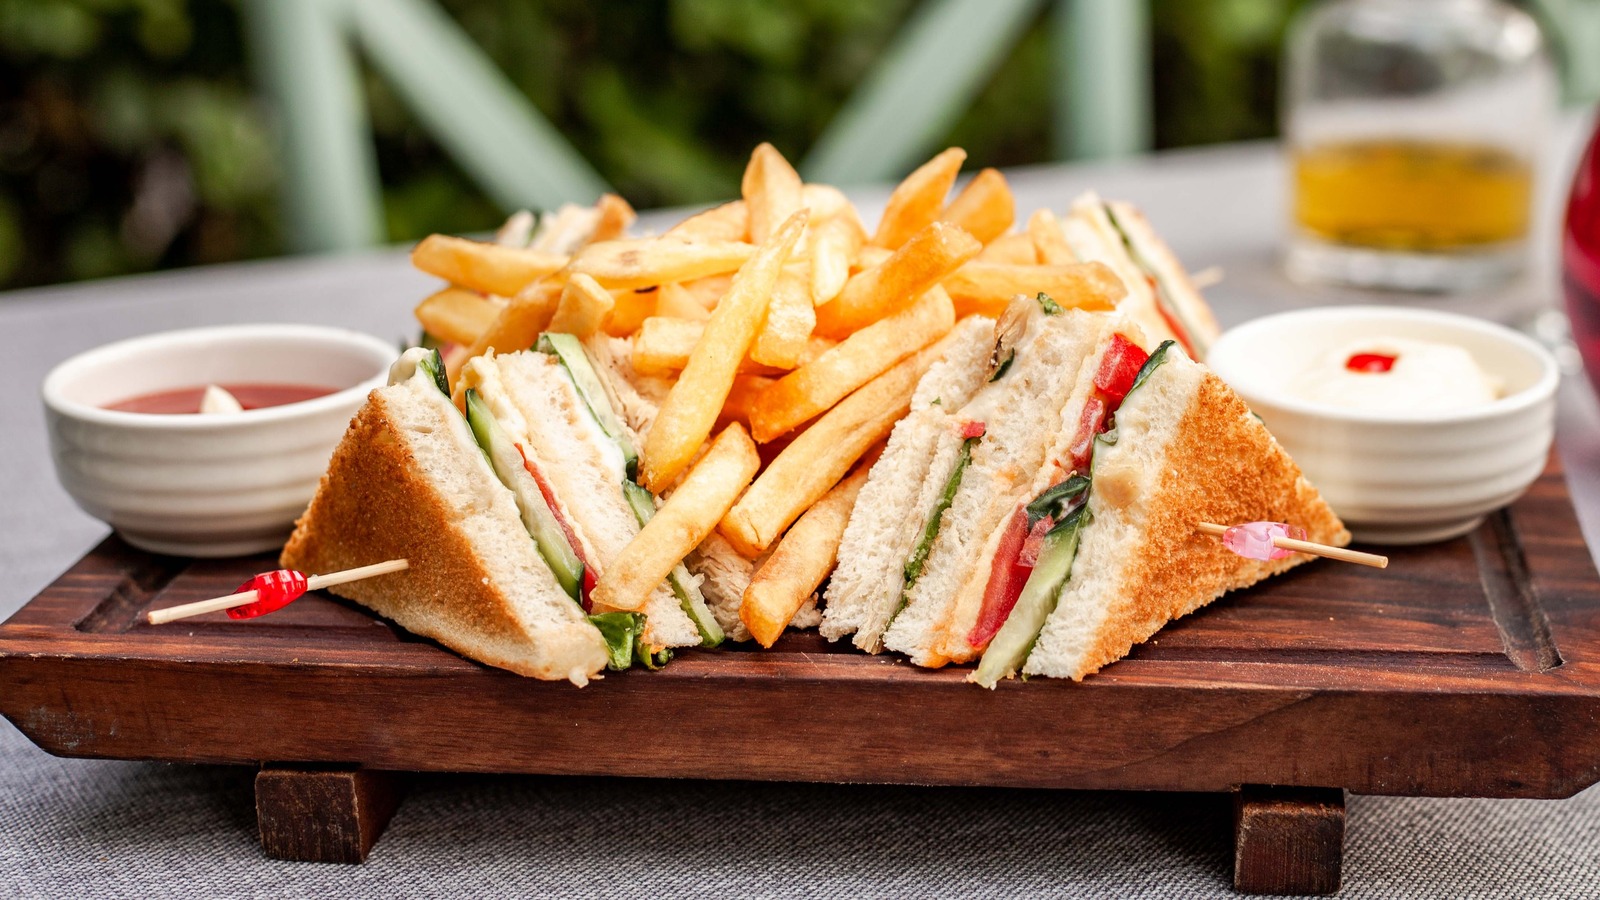 The club sandwich was invented in an exclusive club, but no one is sure in which